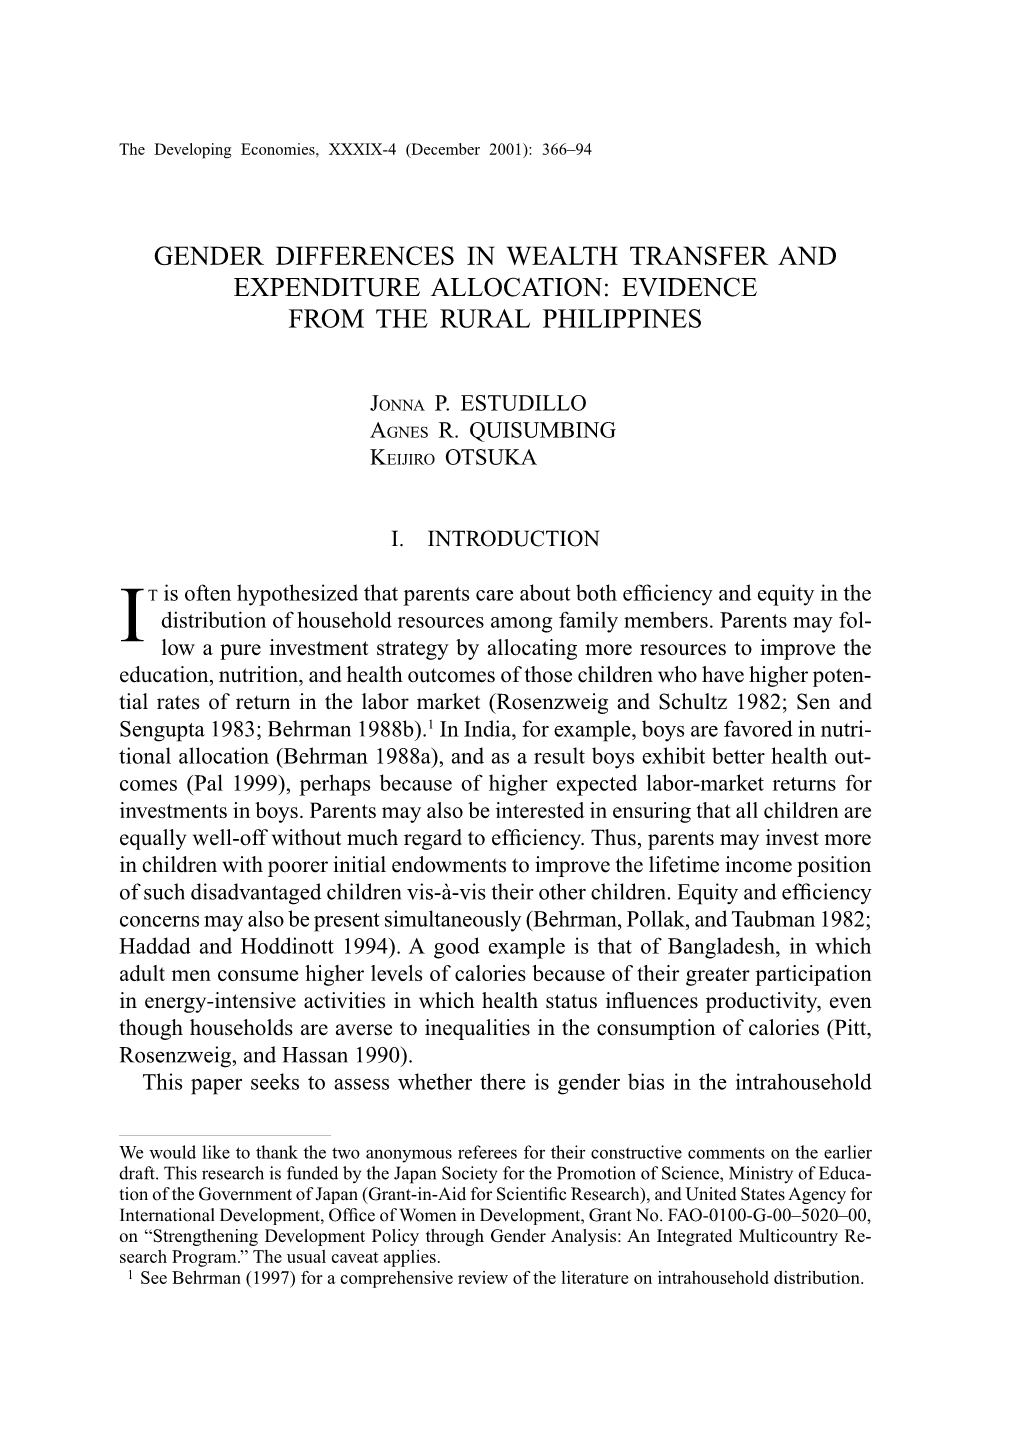 Gender Differences in Wealth Transfer and Expenditure Allocation: Evidence from the Rural Philippines